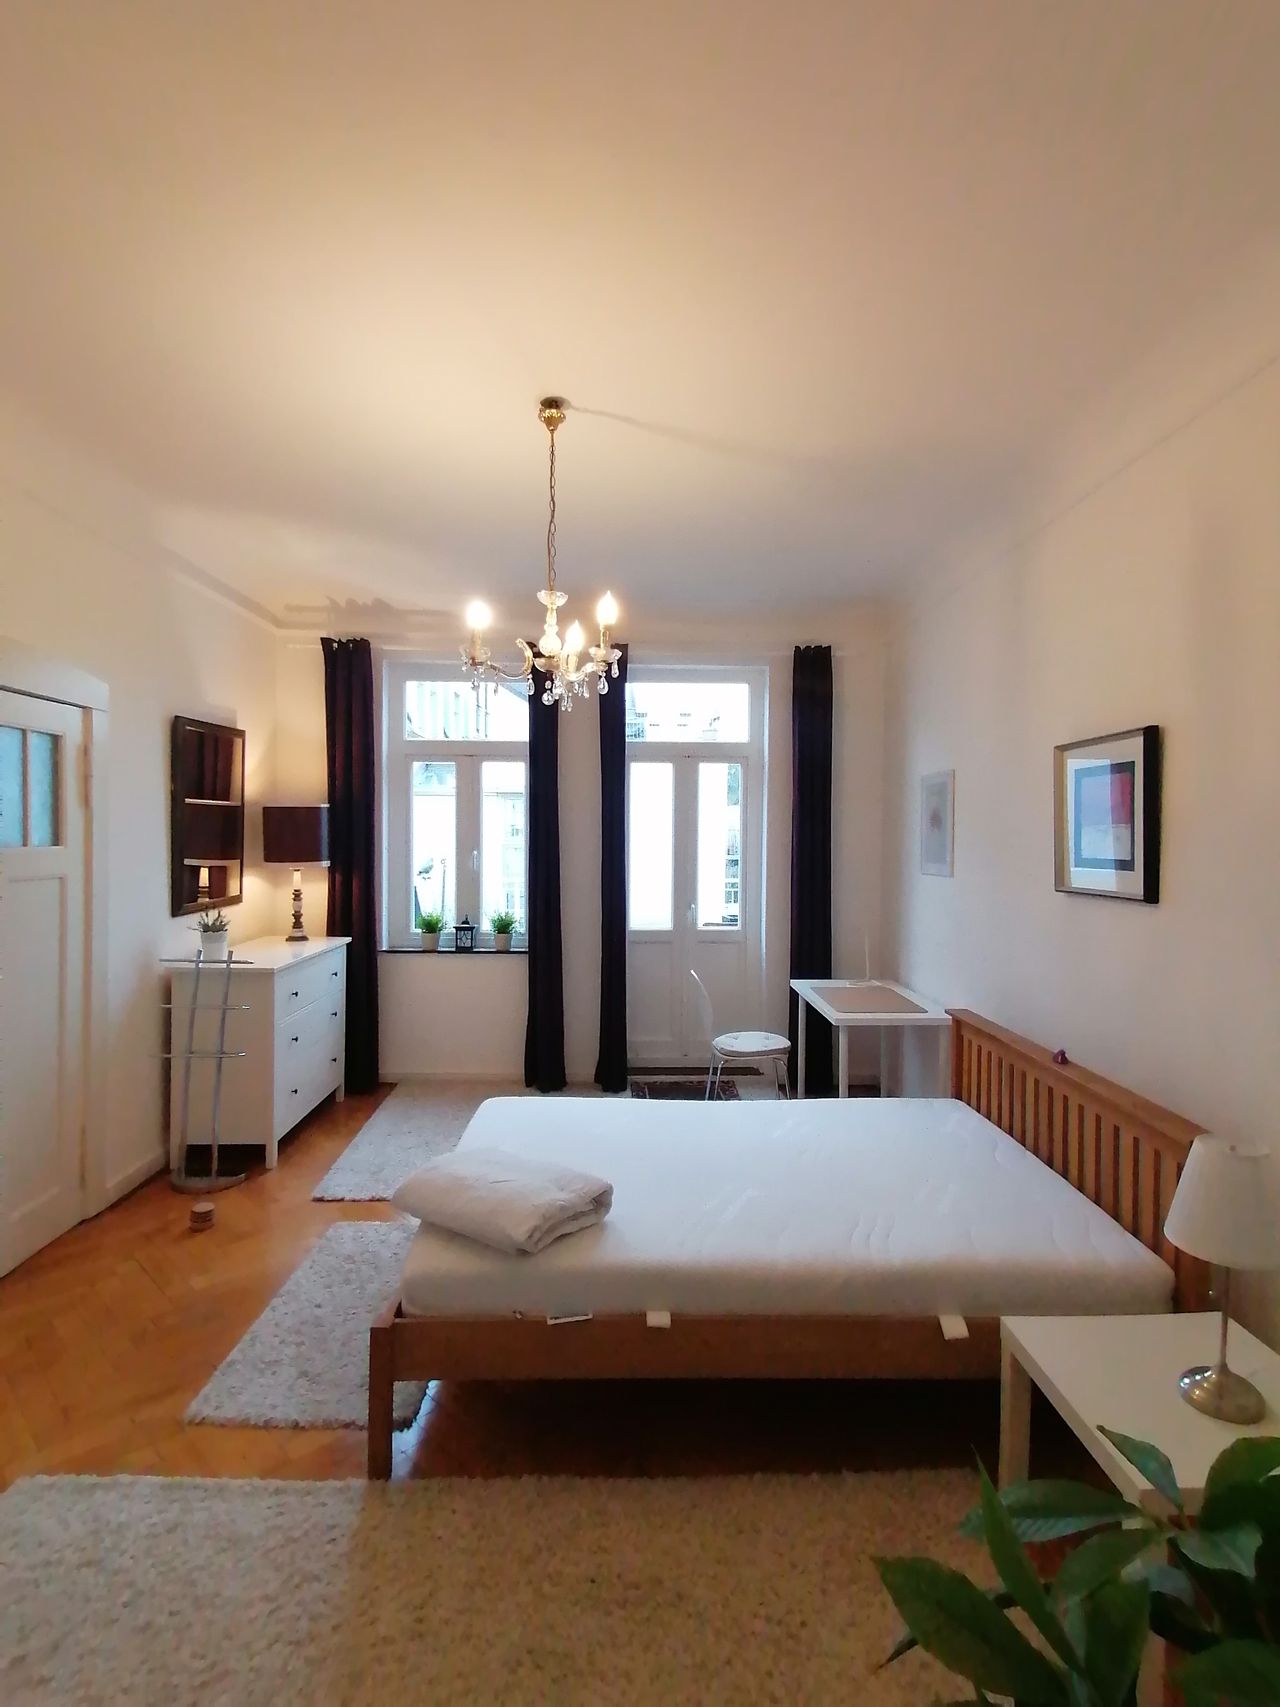 Furnished apartment in an old building in a very good location close to the city, Bürgerpark and university